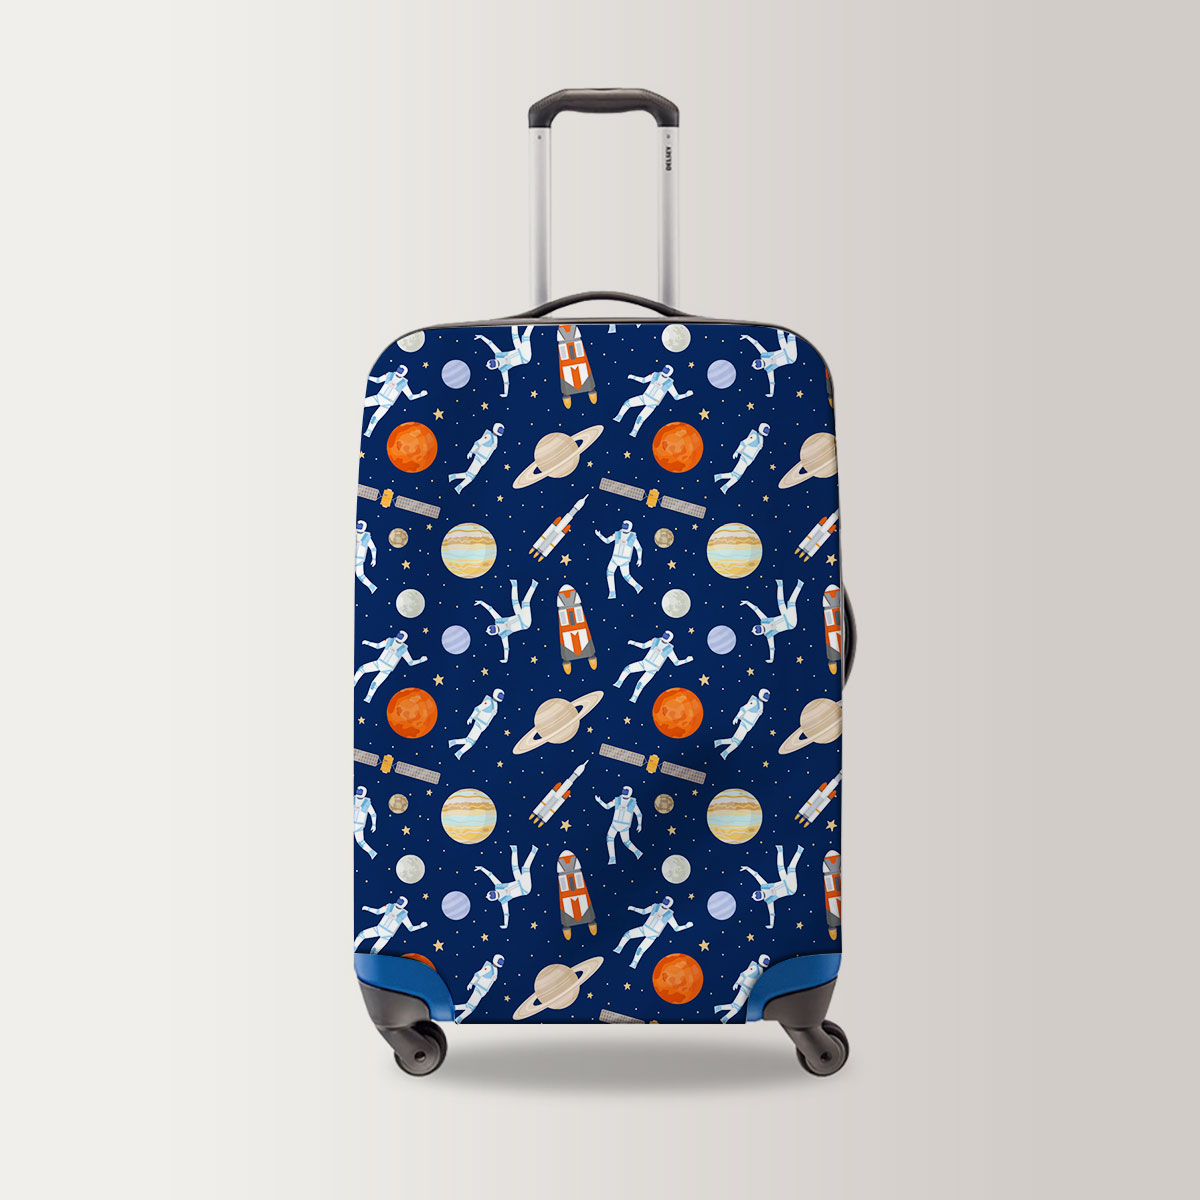 Outer Space Astronaut Luggage Bag